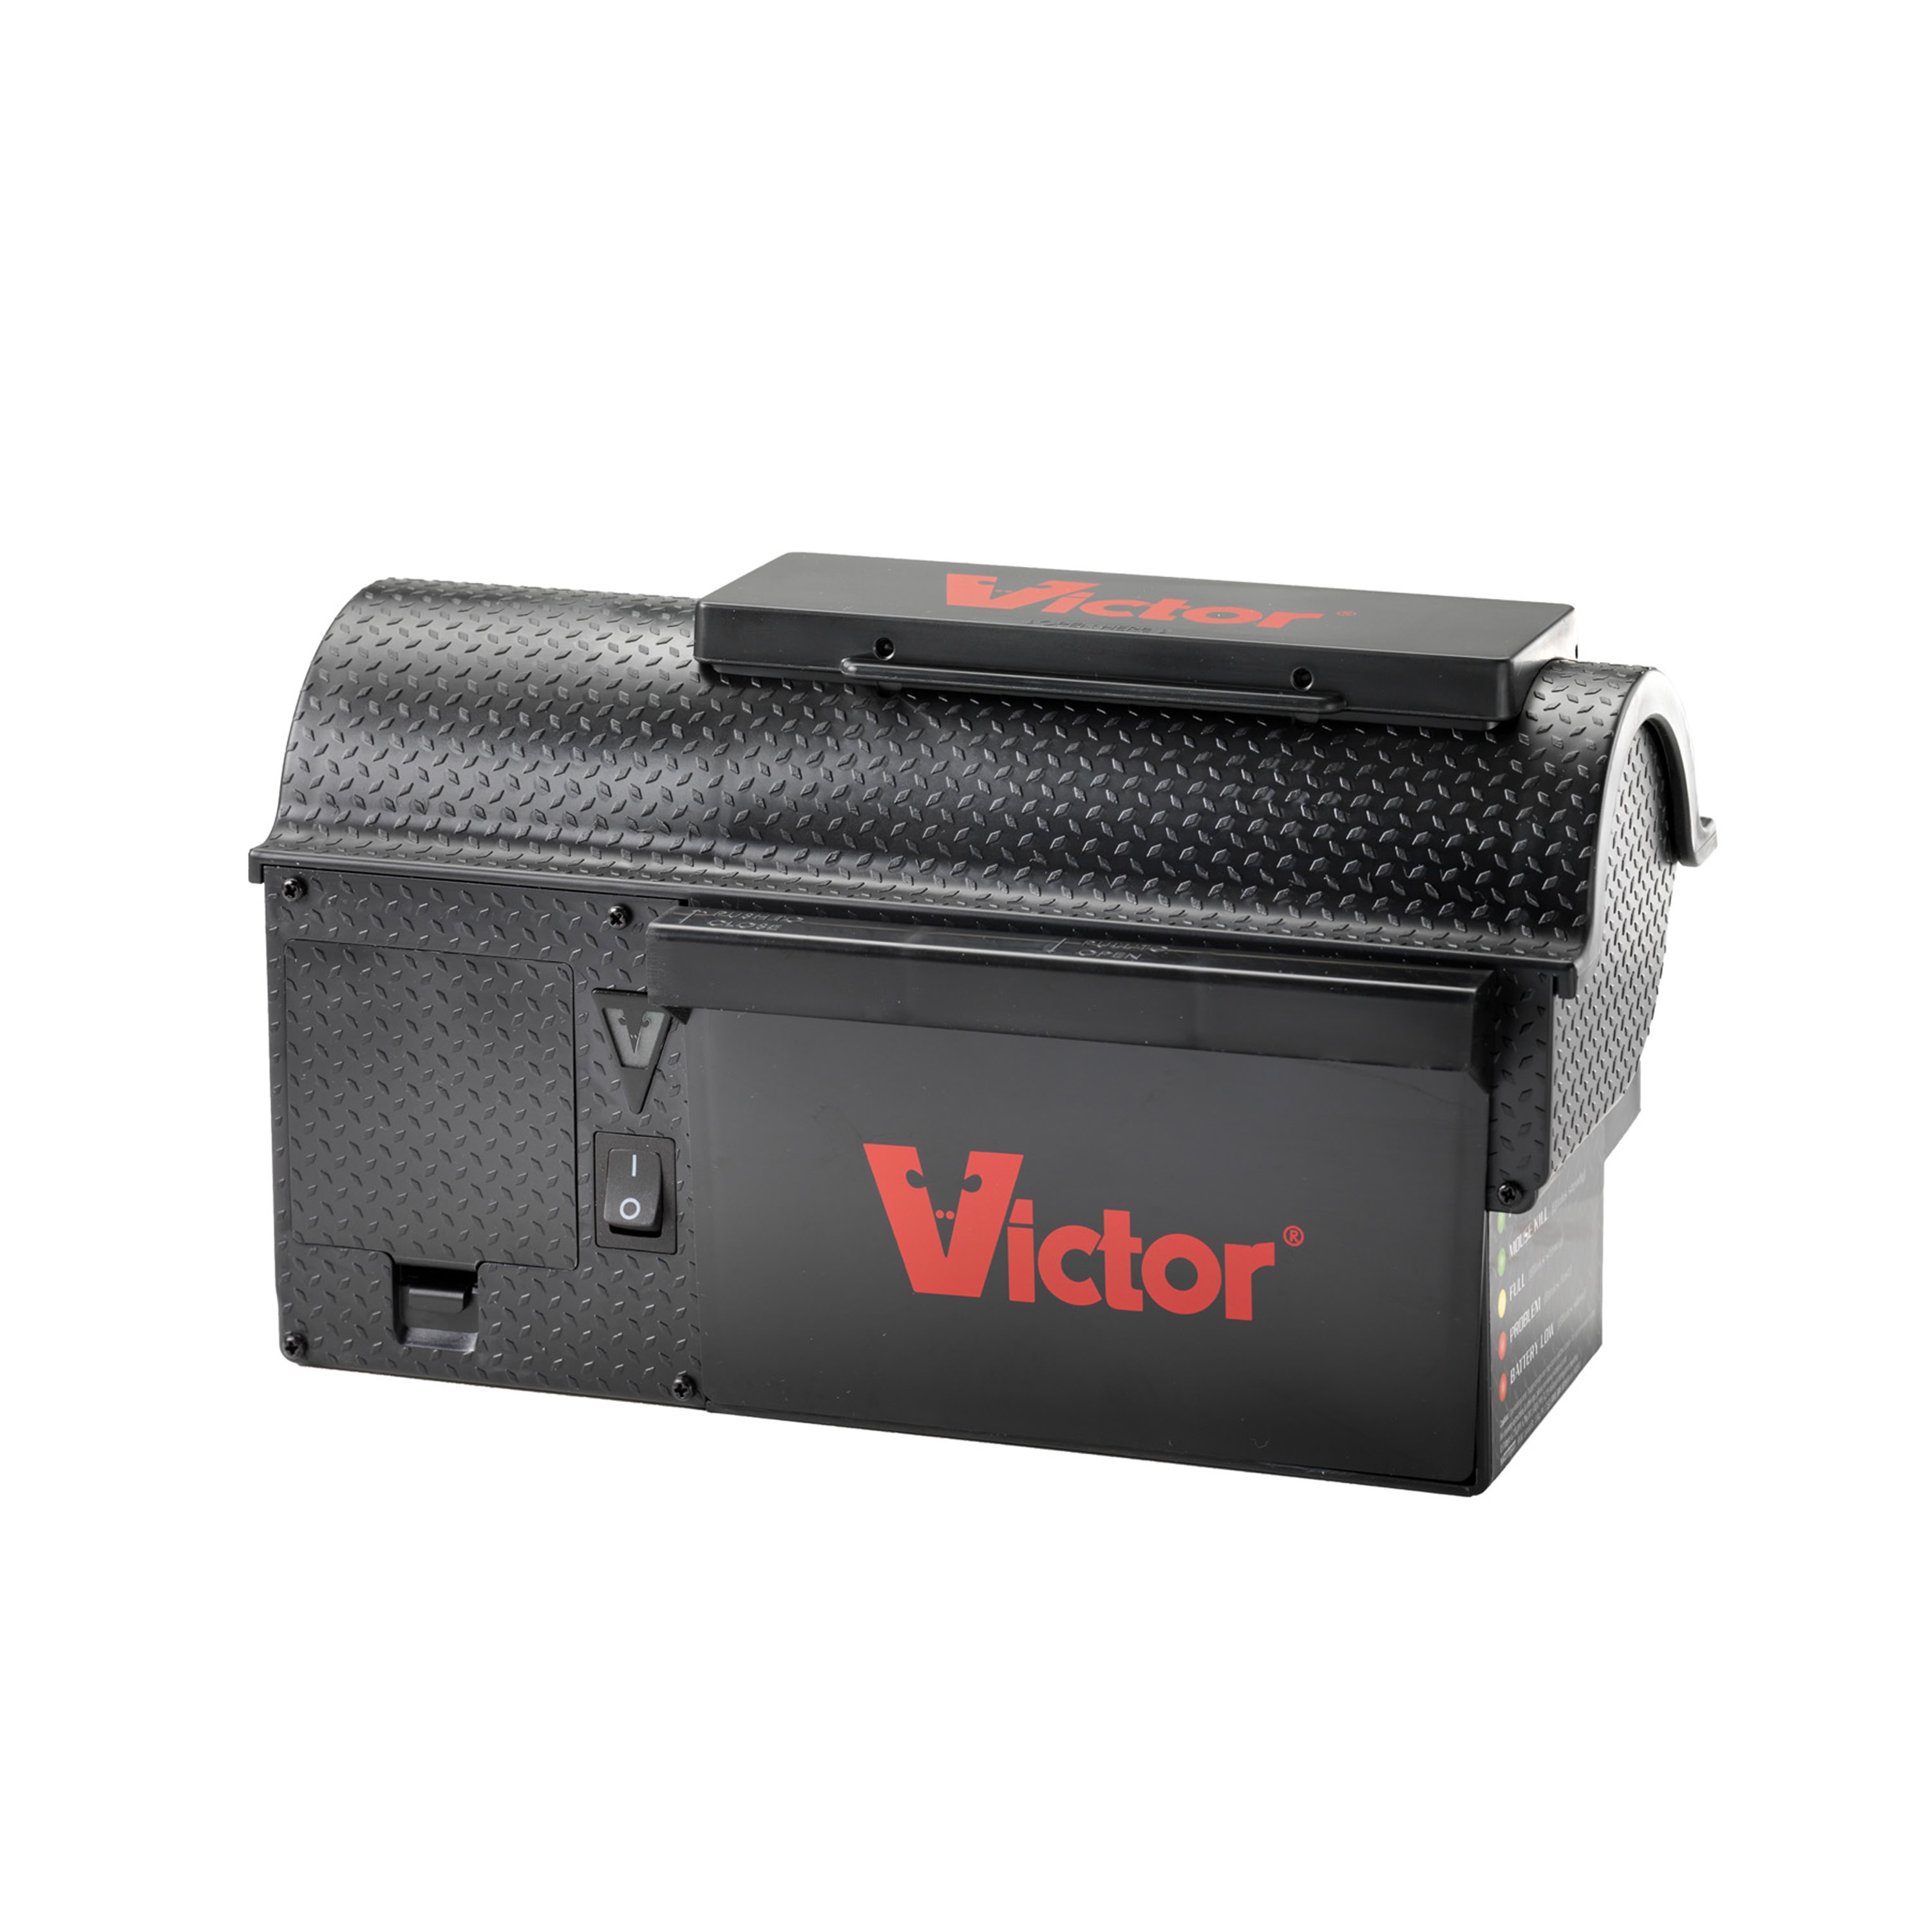 Victor Electronic Mouse Trap, 2 Pack 